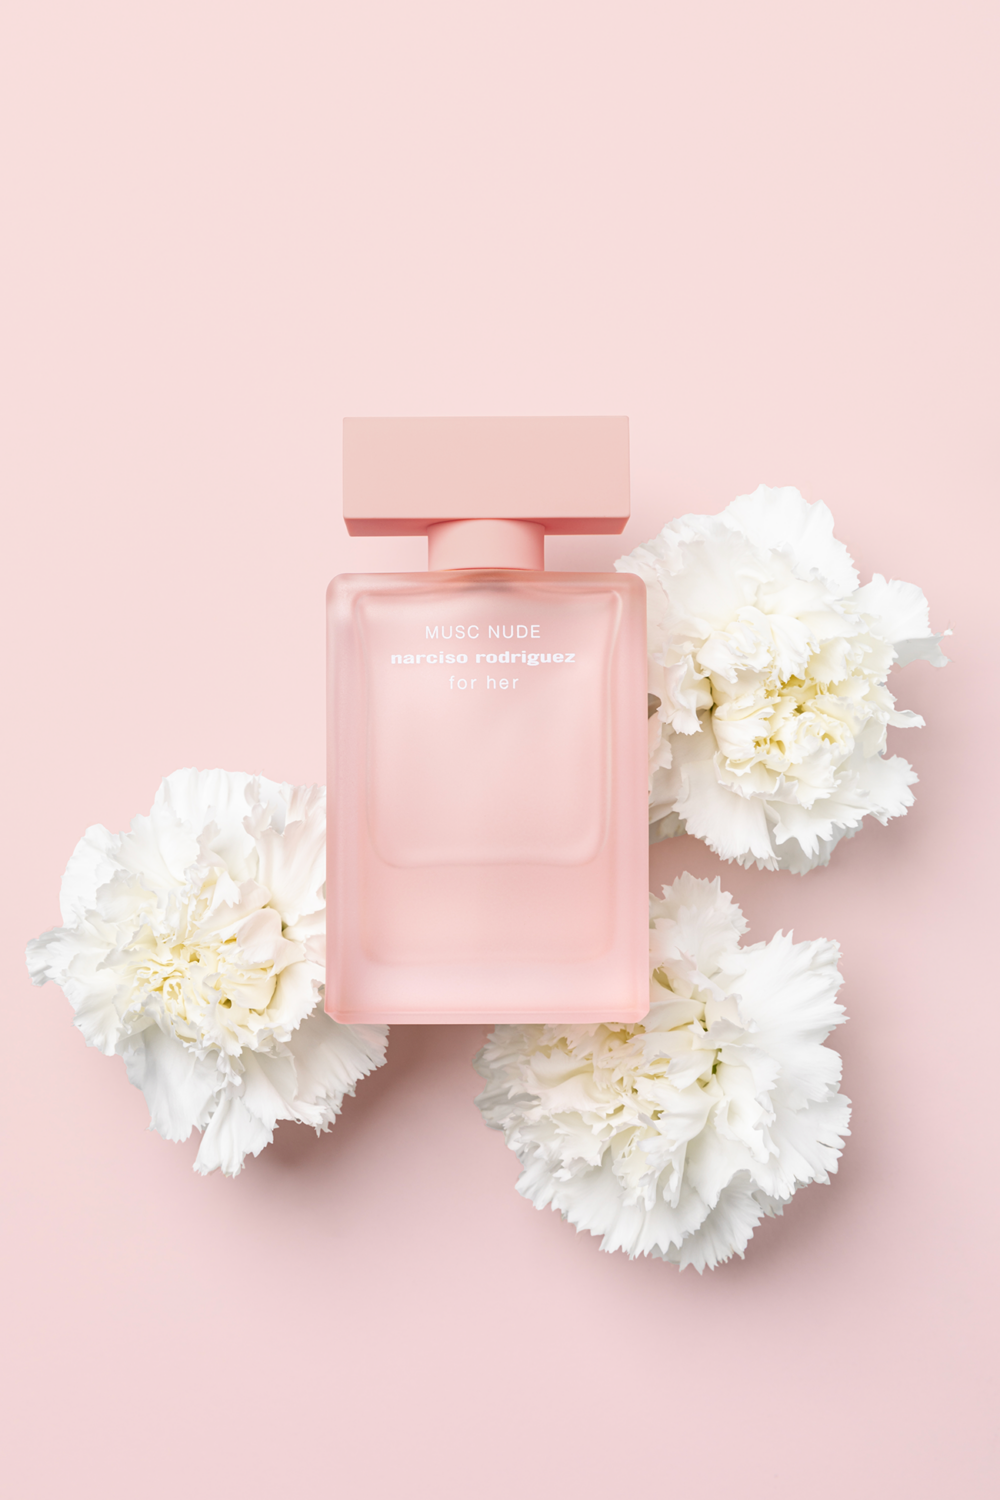 narciso rodriguez musc nude parfume with flowers | Photo by fonnesbo